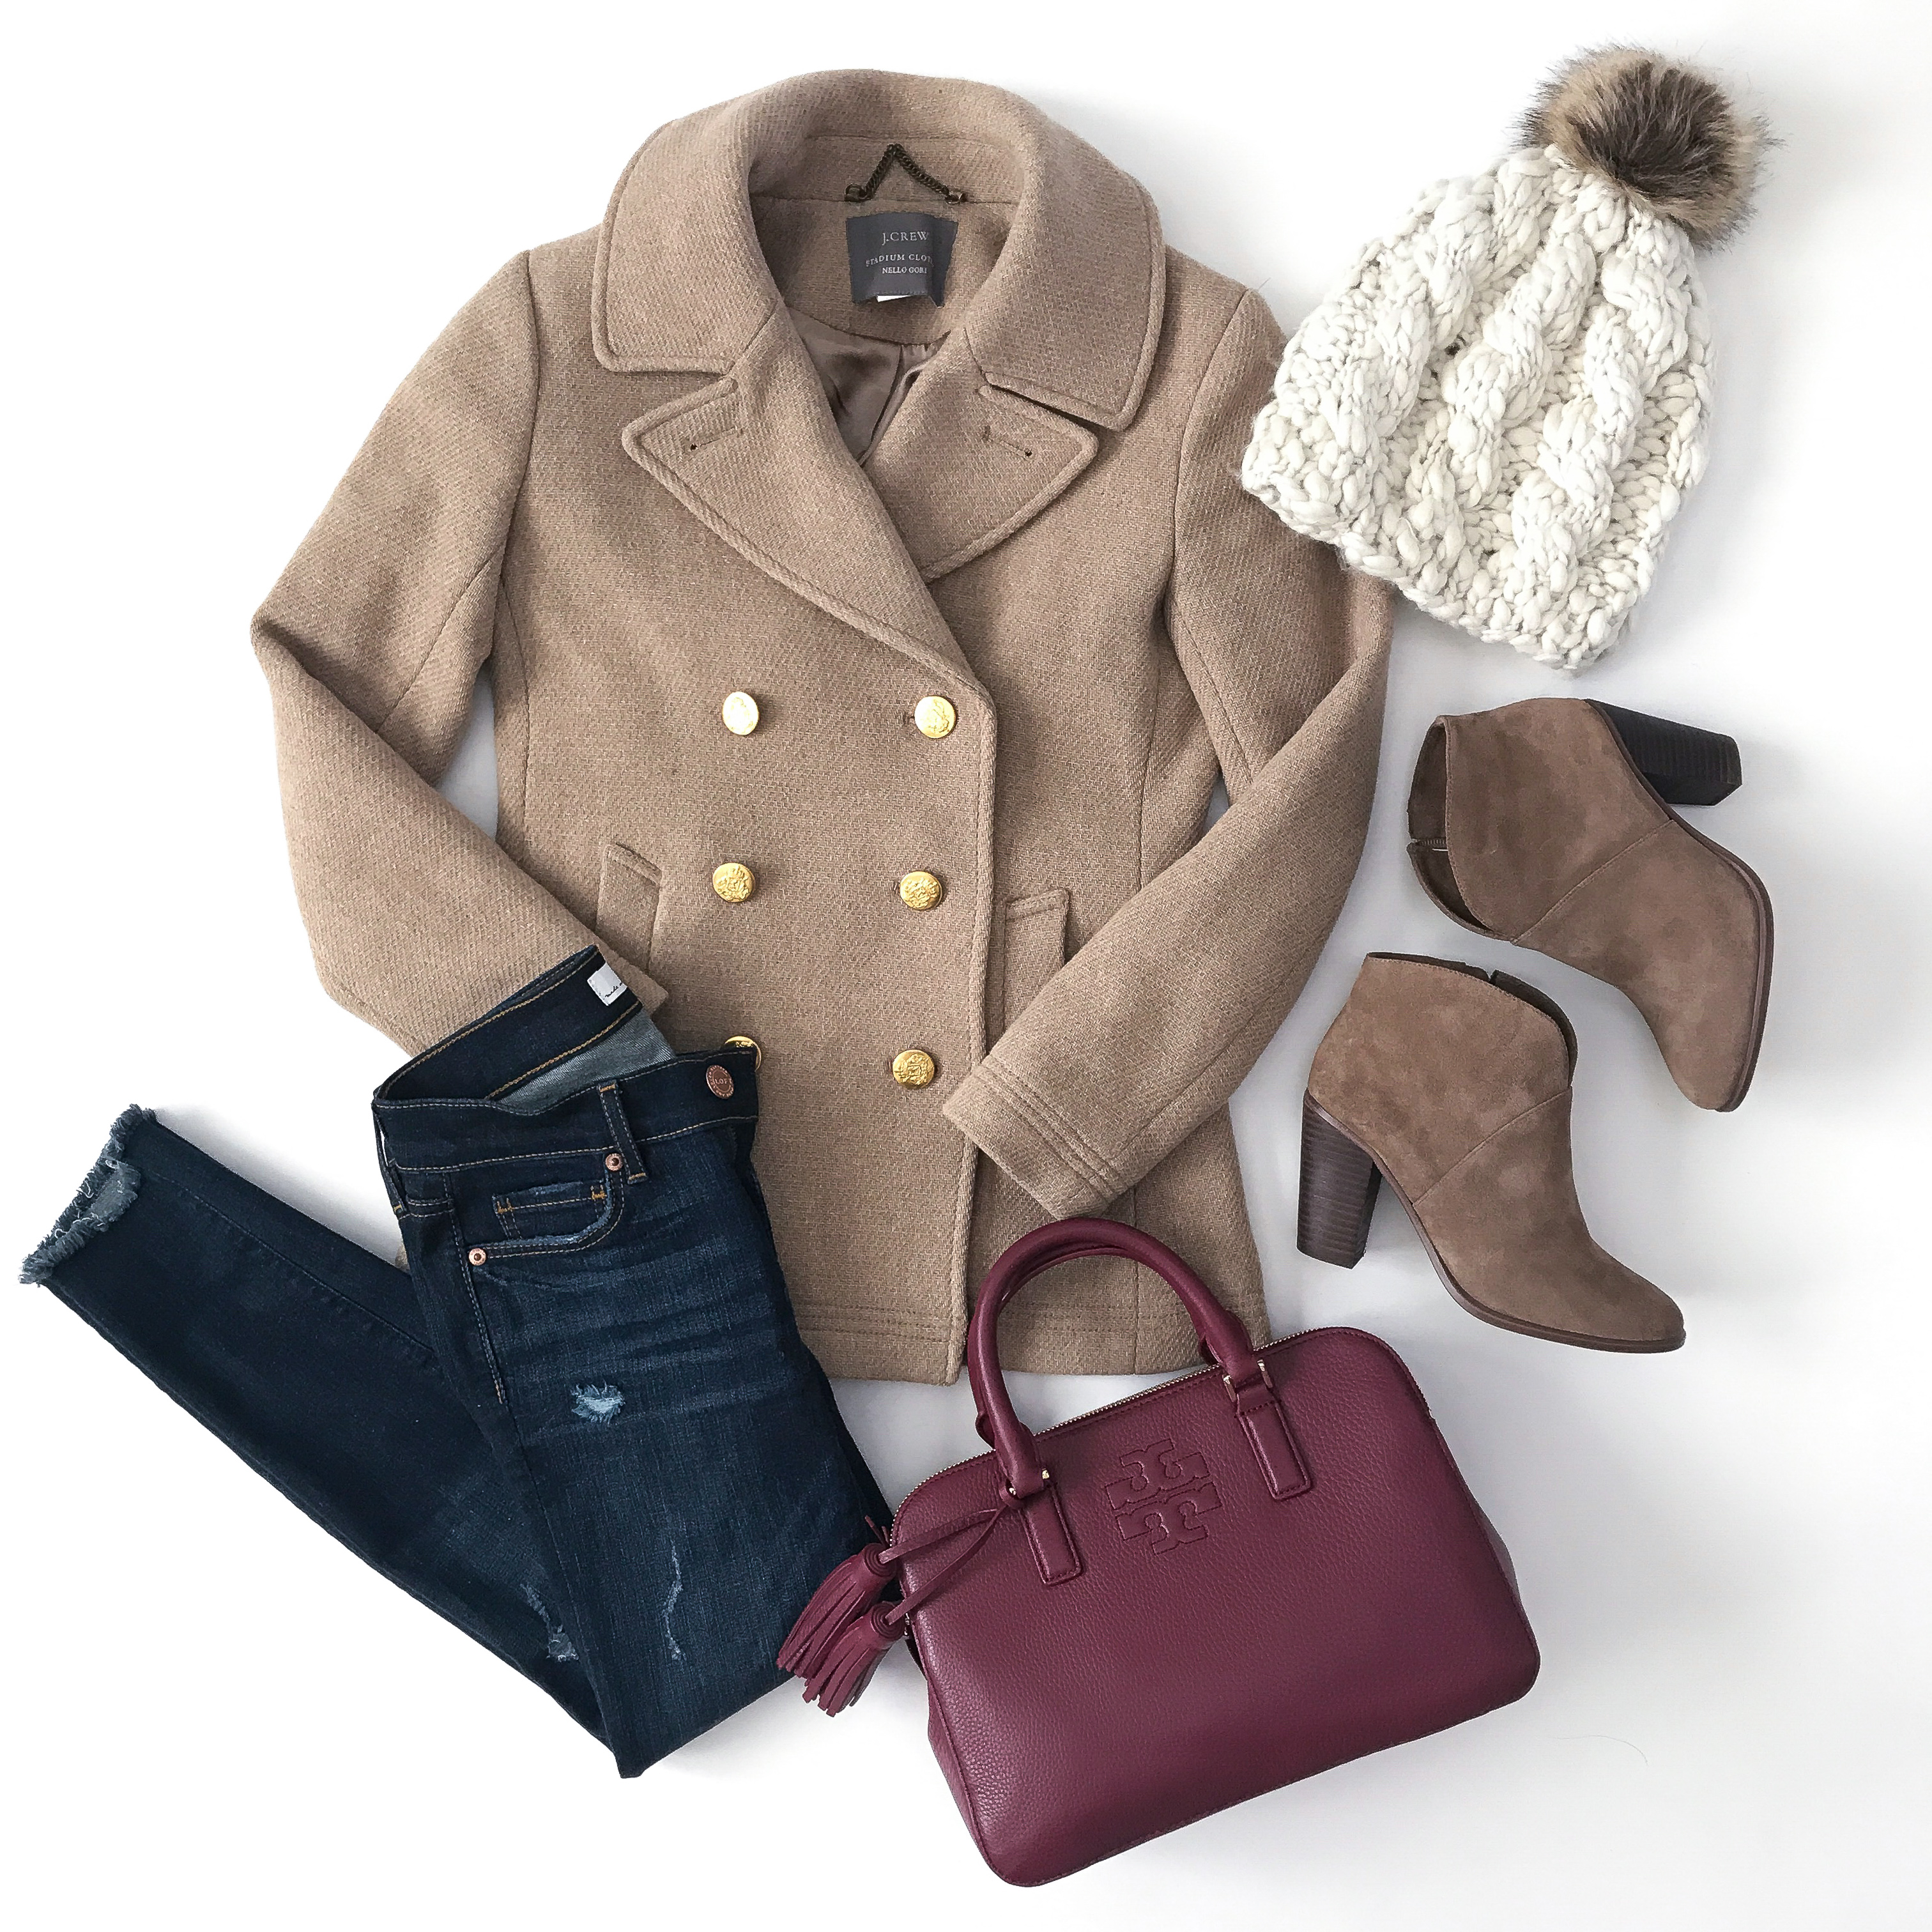 winter outfit idea majesty coat cable knit beanie franell bootie